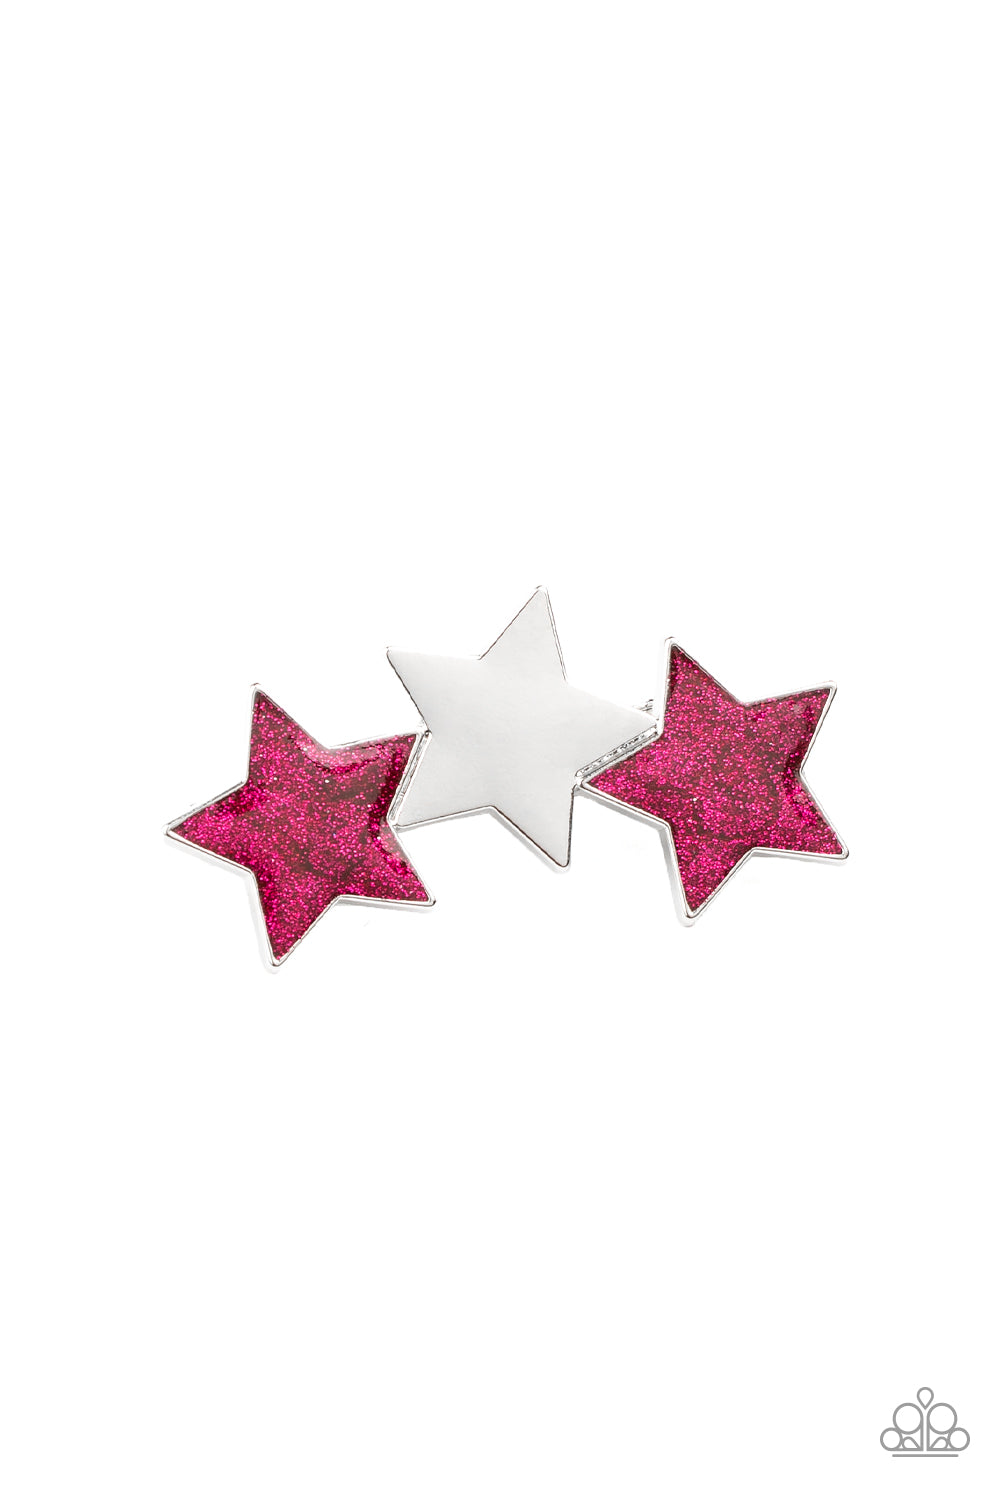 Don't Get Me STAR-ted__Hair Accessories__Pink